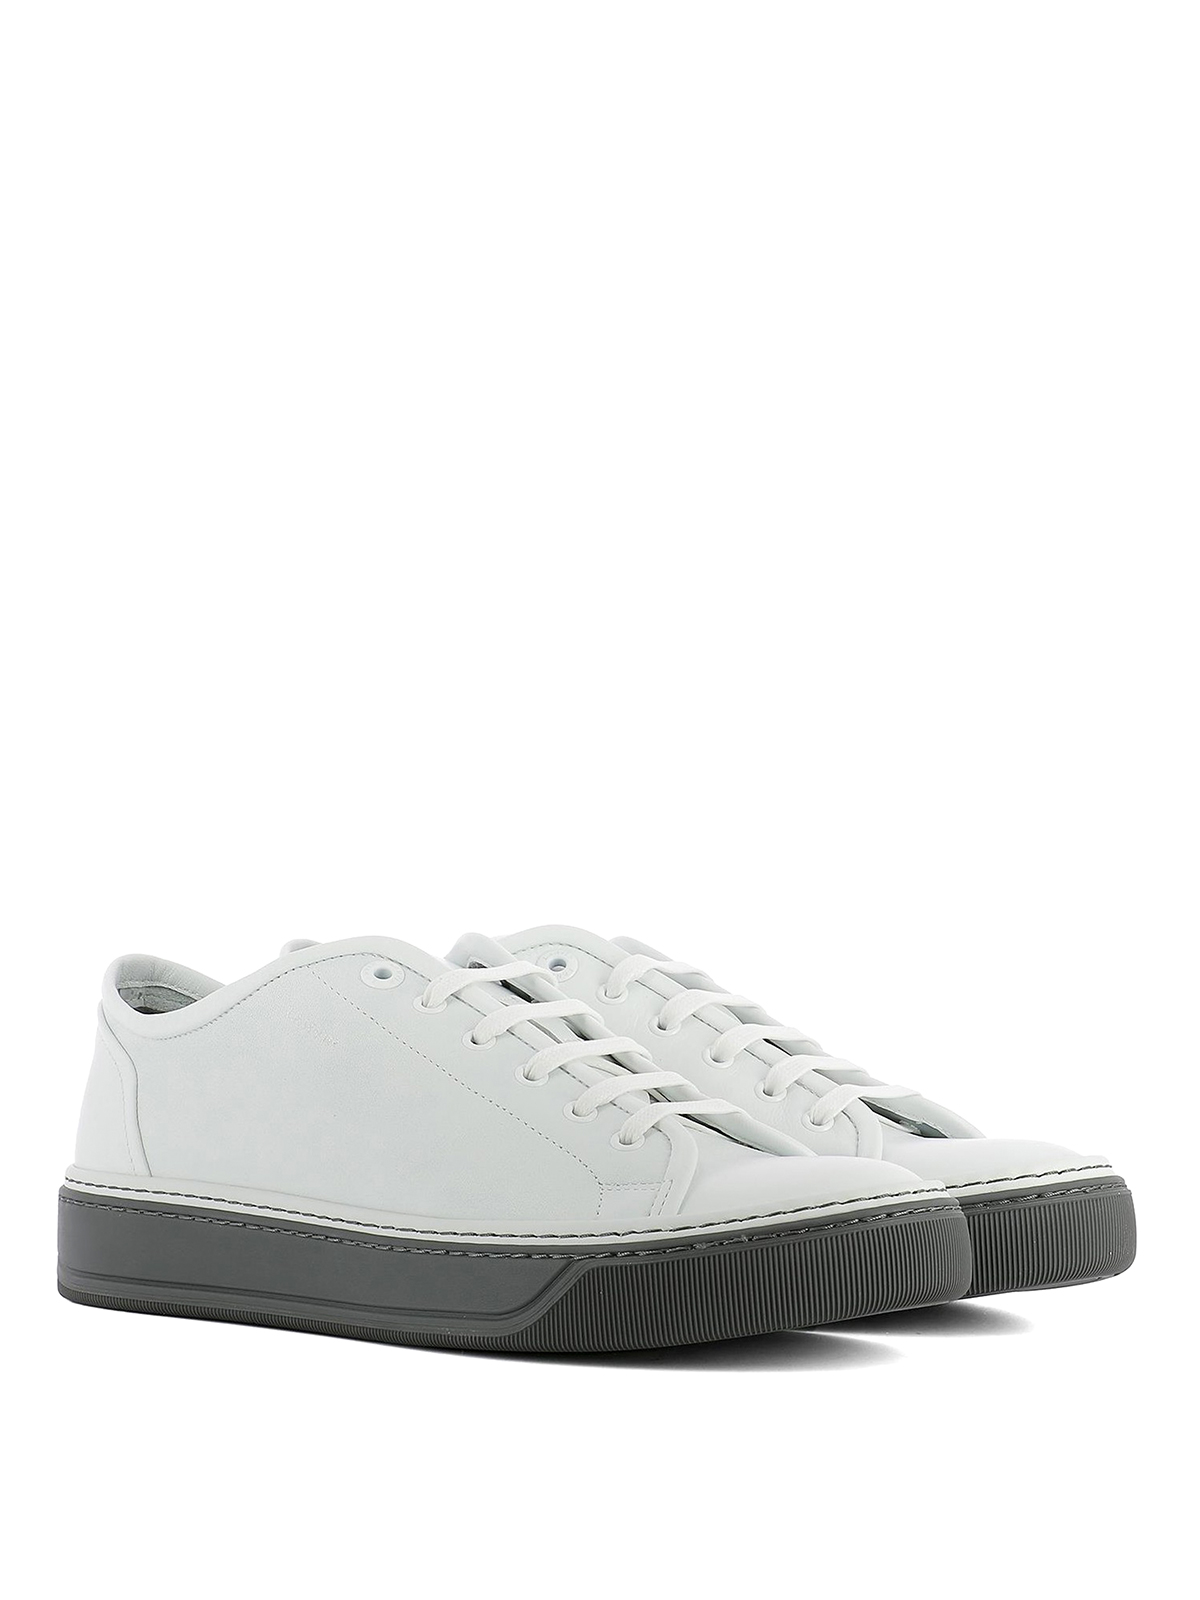 Lanvin - White leather low top sneakers 